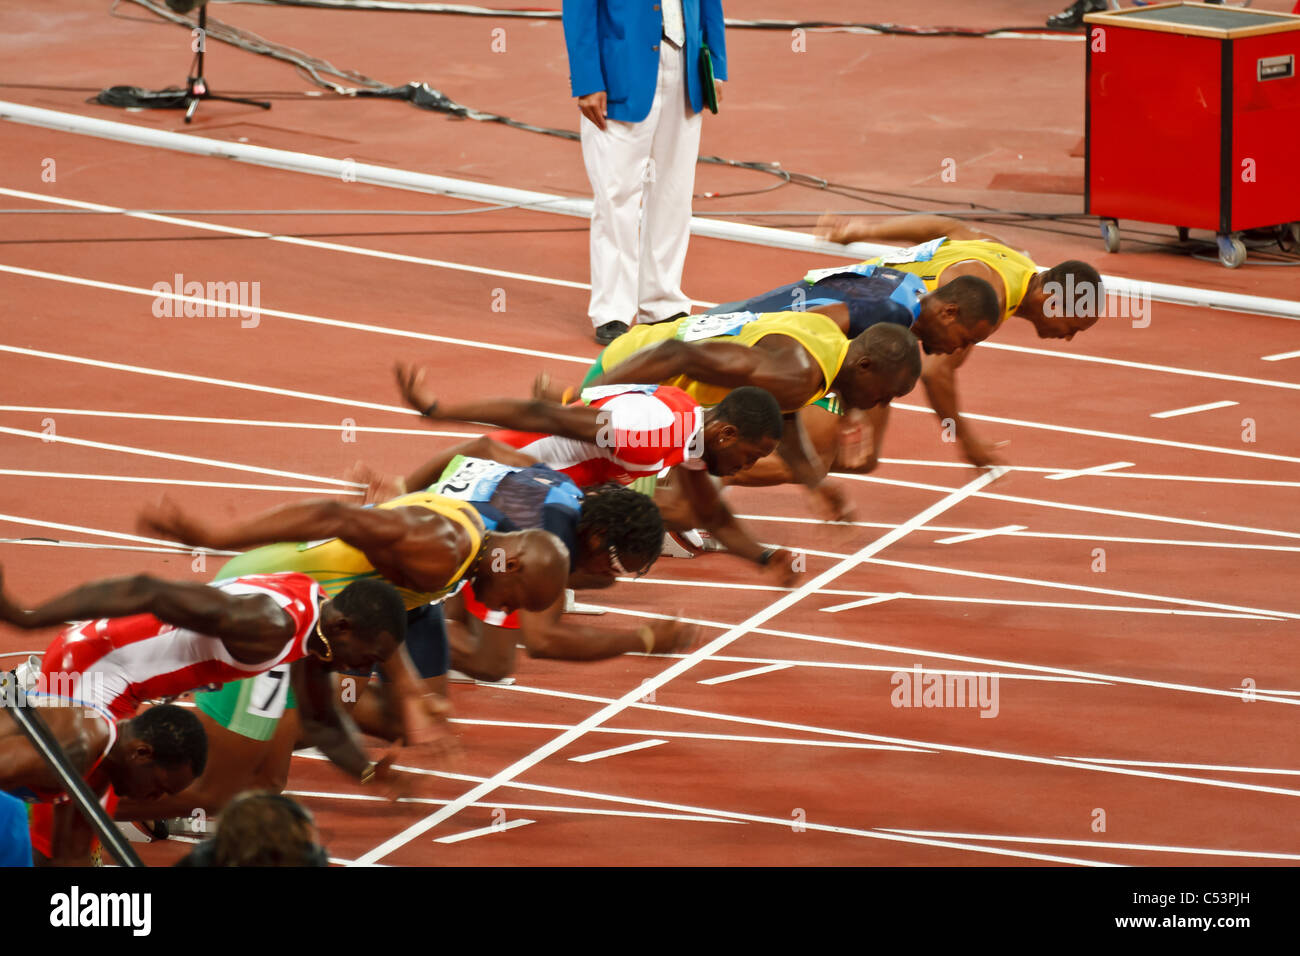 Start of Men's 100 meter sprint race where Usain Bolt sets a new world  record at the 2008 Olympic. Aug 18, 2008 Beijing, China Stock Photo - Alamy